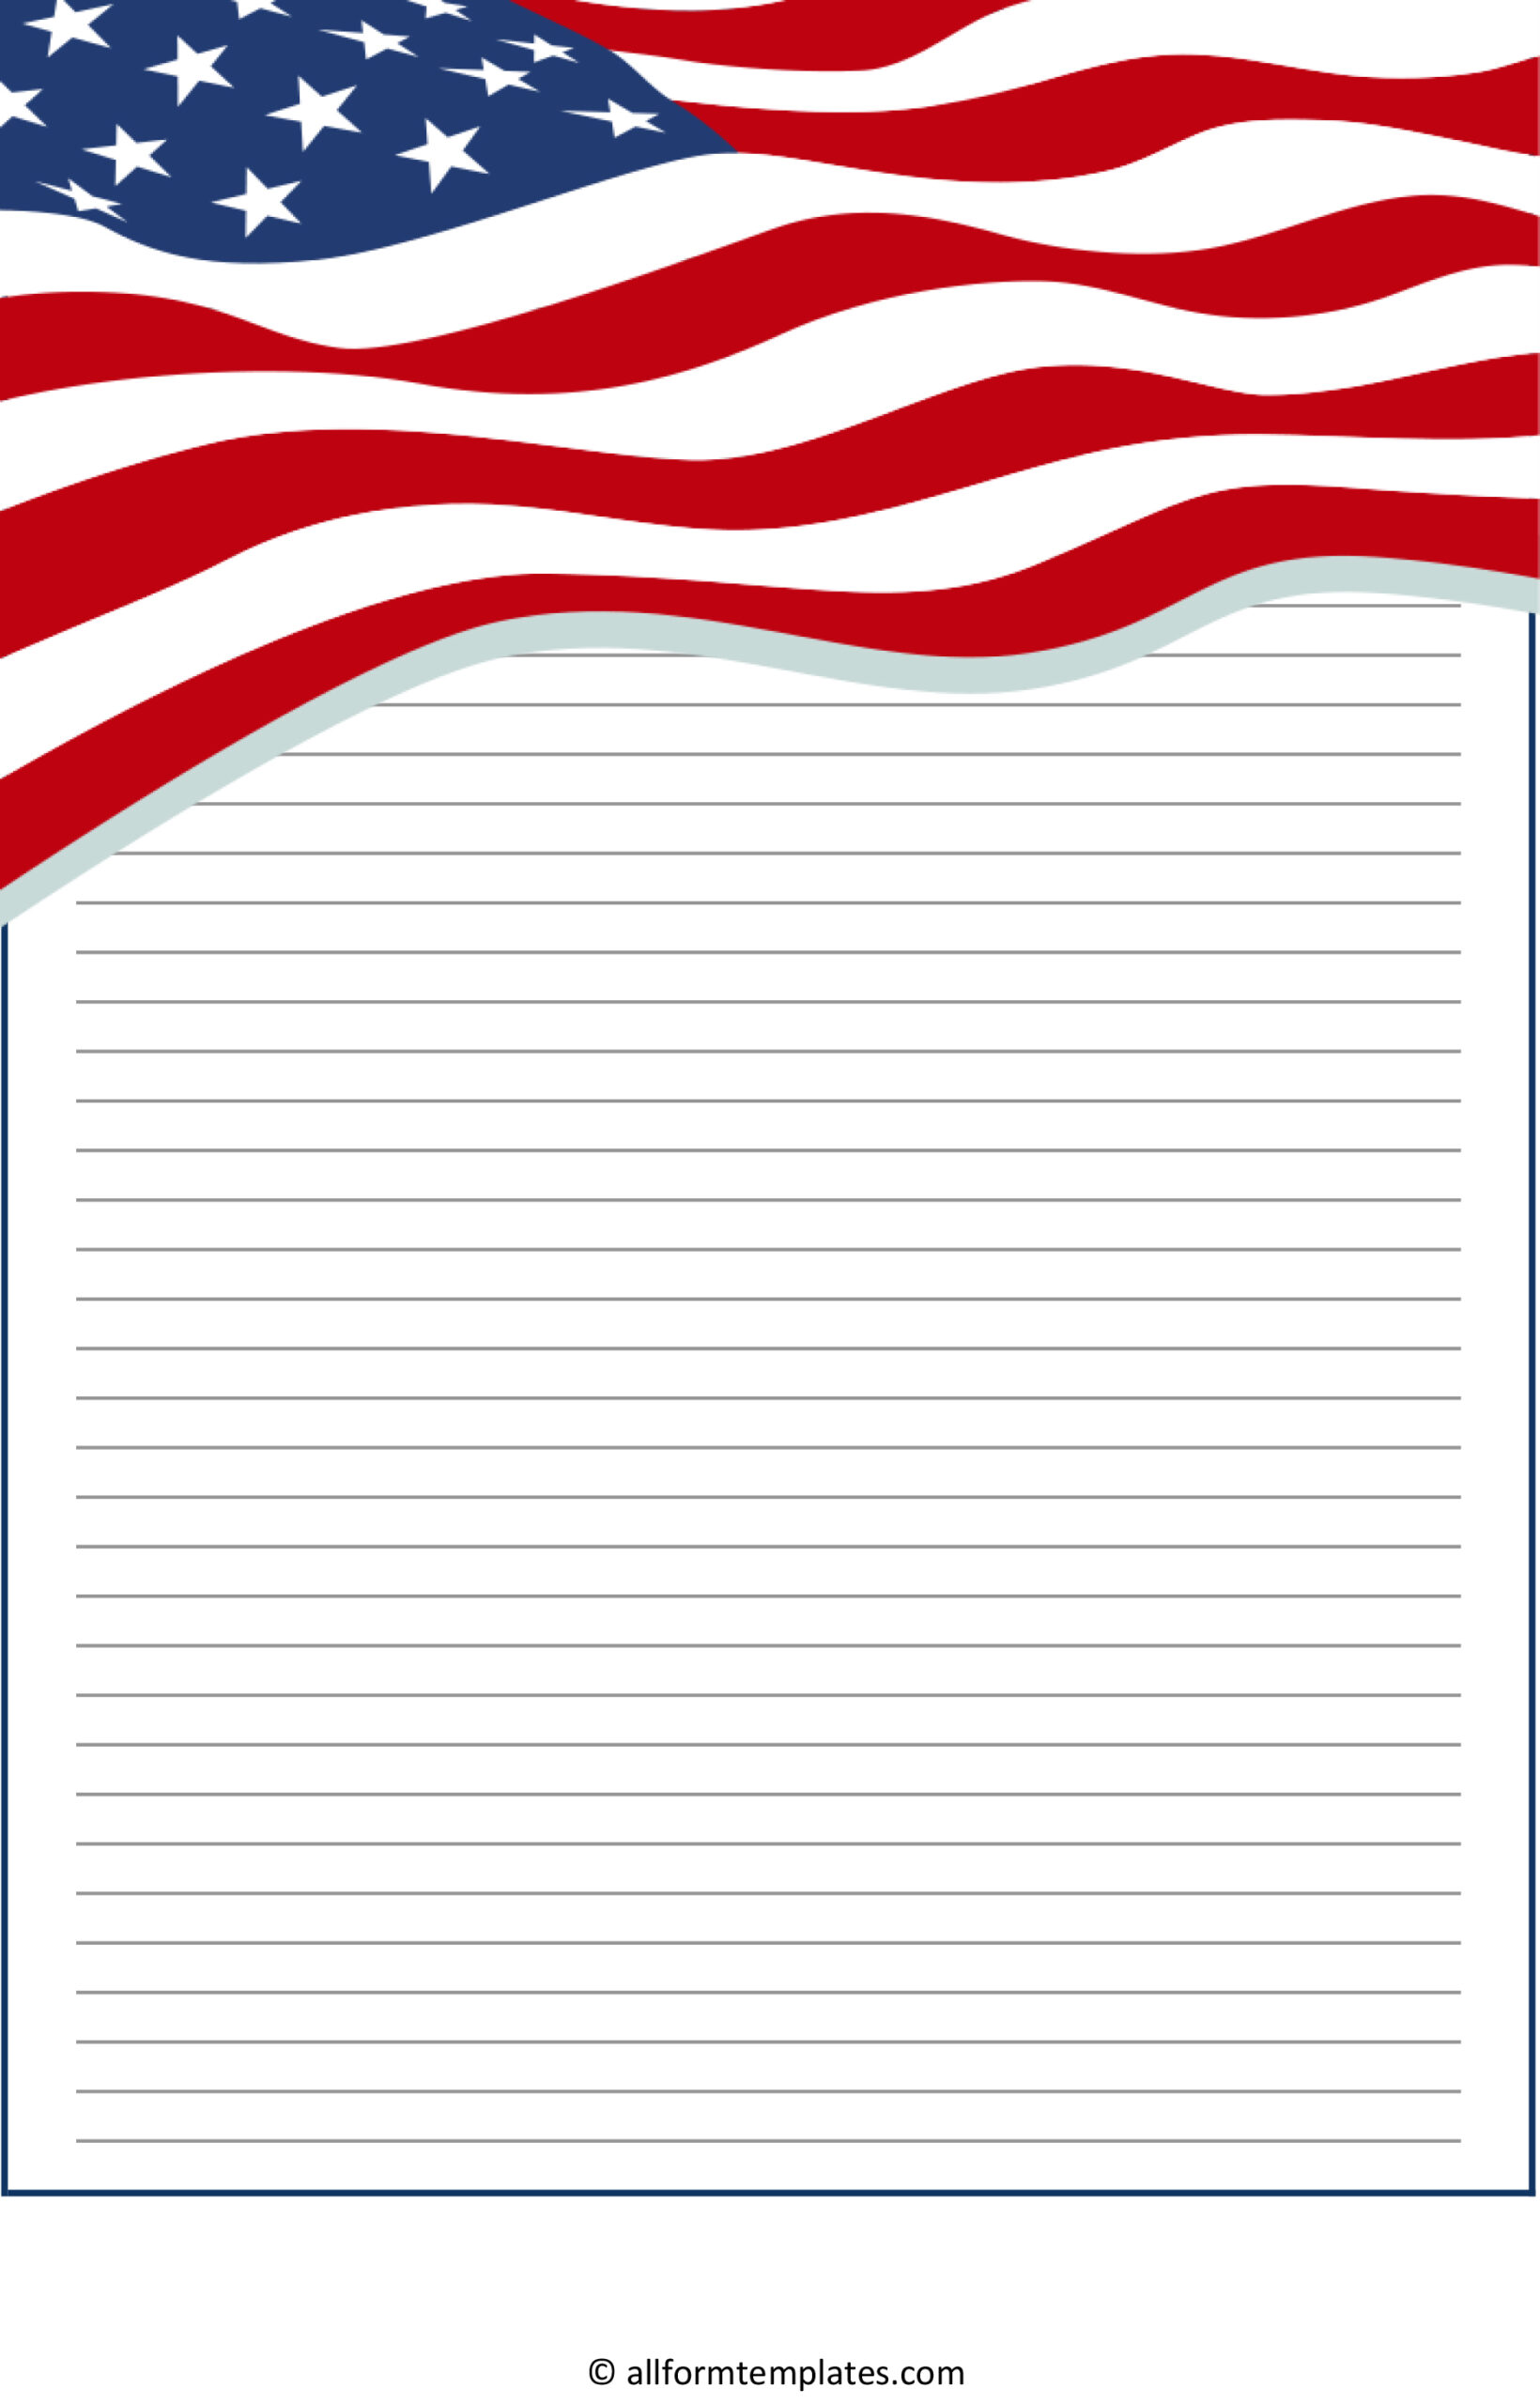 American flag writing paper HD All Form Templates